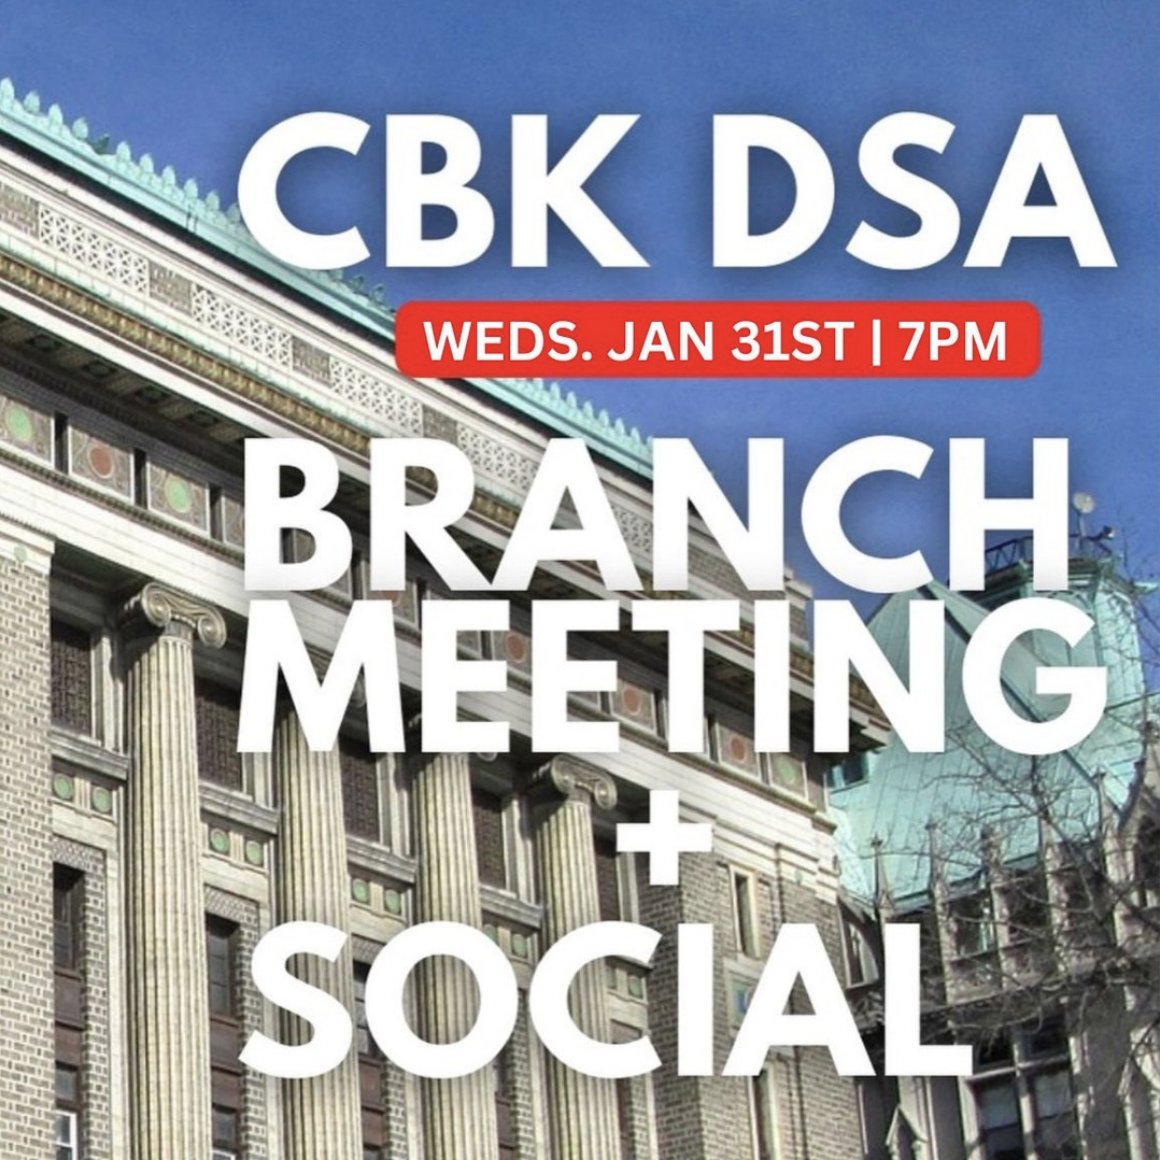 Central Brooklyn Democratic Socialists of America branch meeting and social this WEDNESDAY, January 31 at 7pm! We’ll be discussing tentant unions, Independent Working Class Organizing, ecosocialist updates, and more! Sign up here -> actionnetwork.org/events/january…